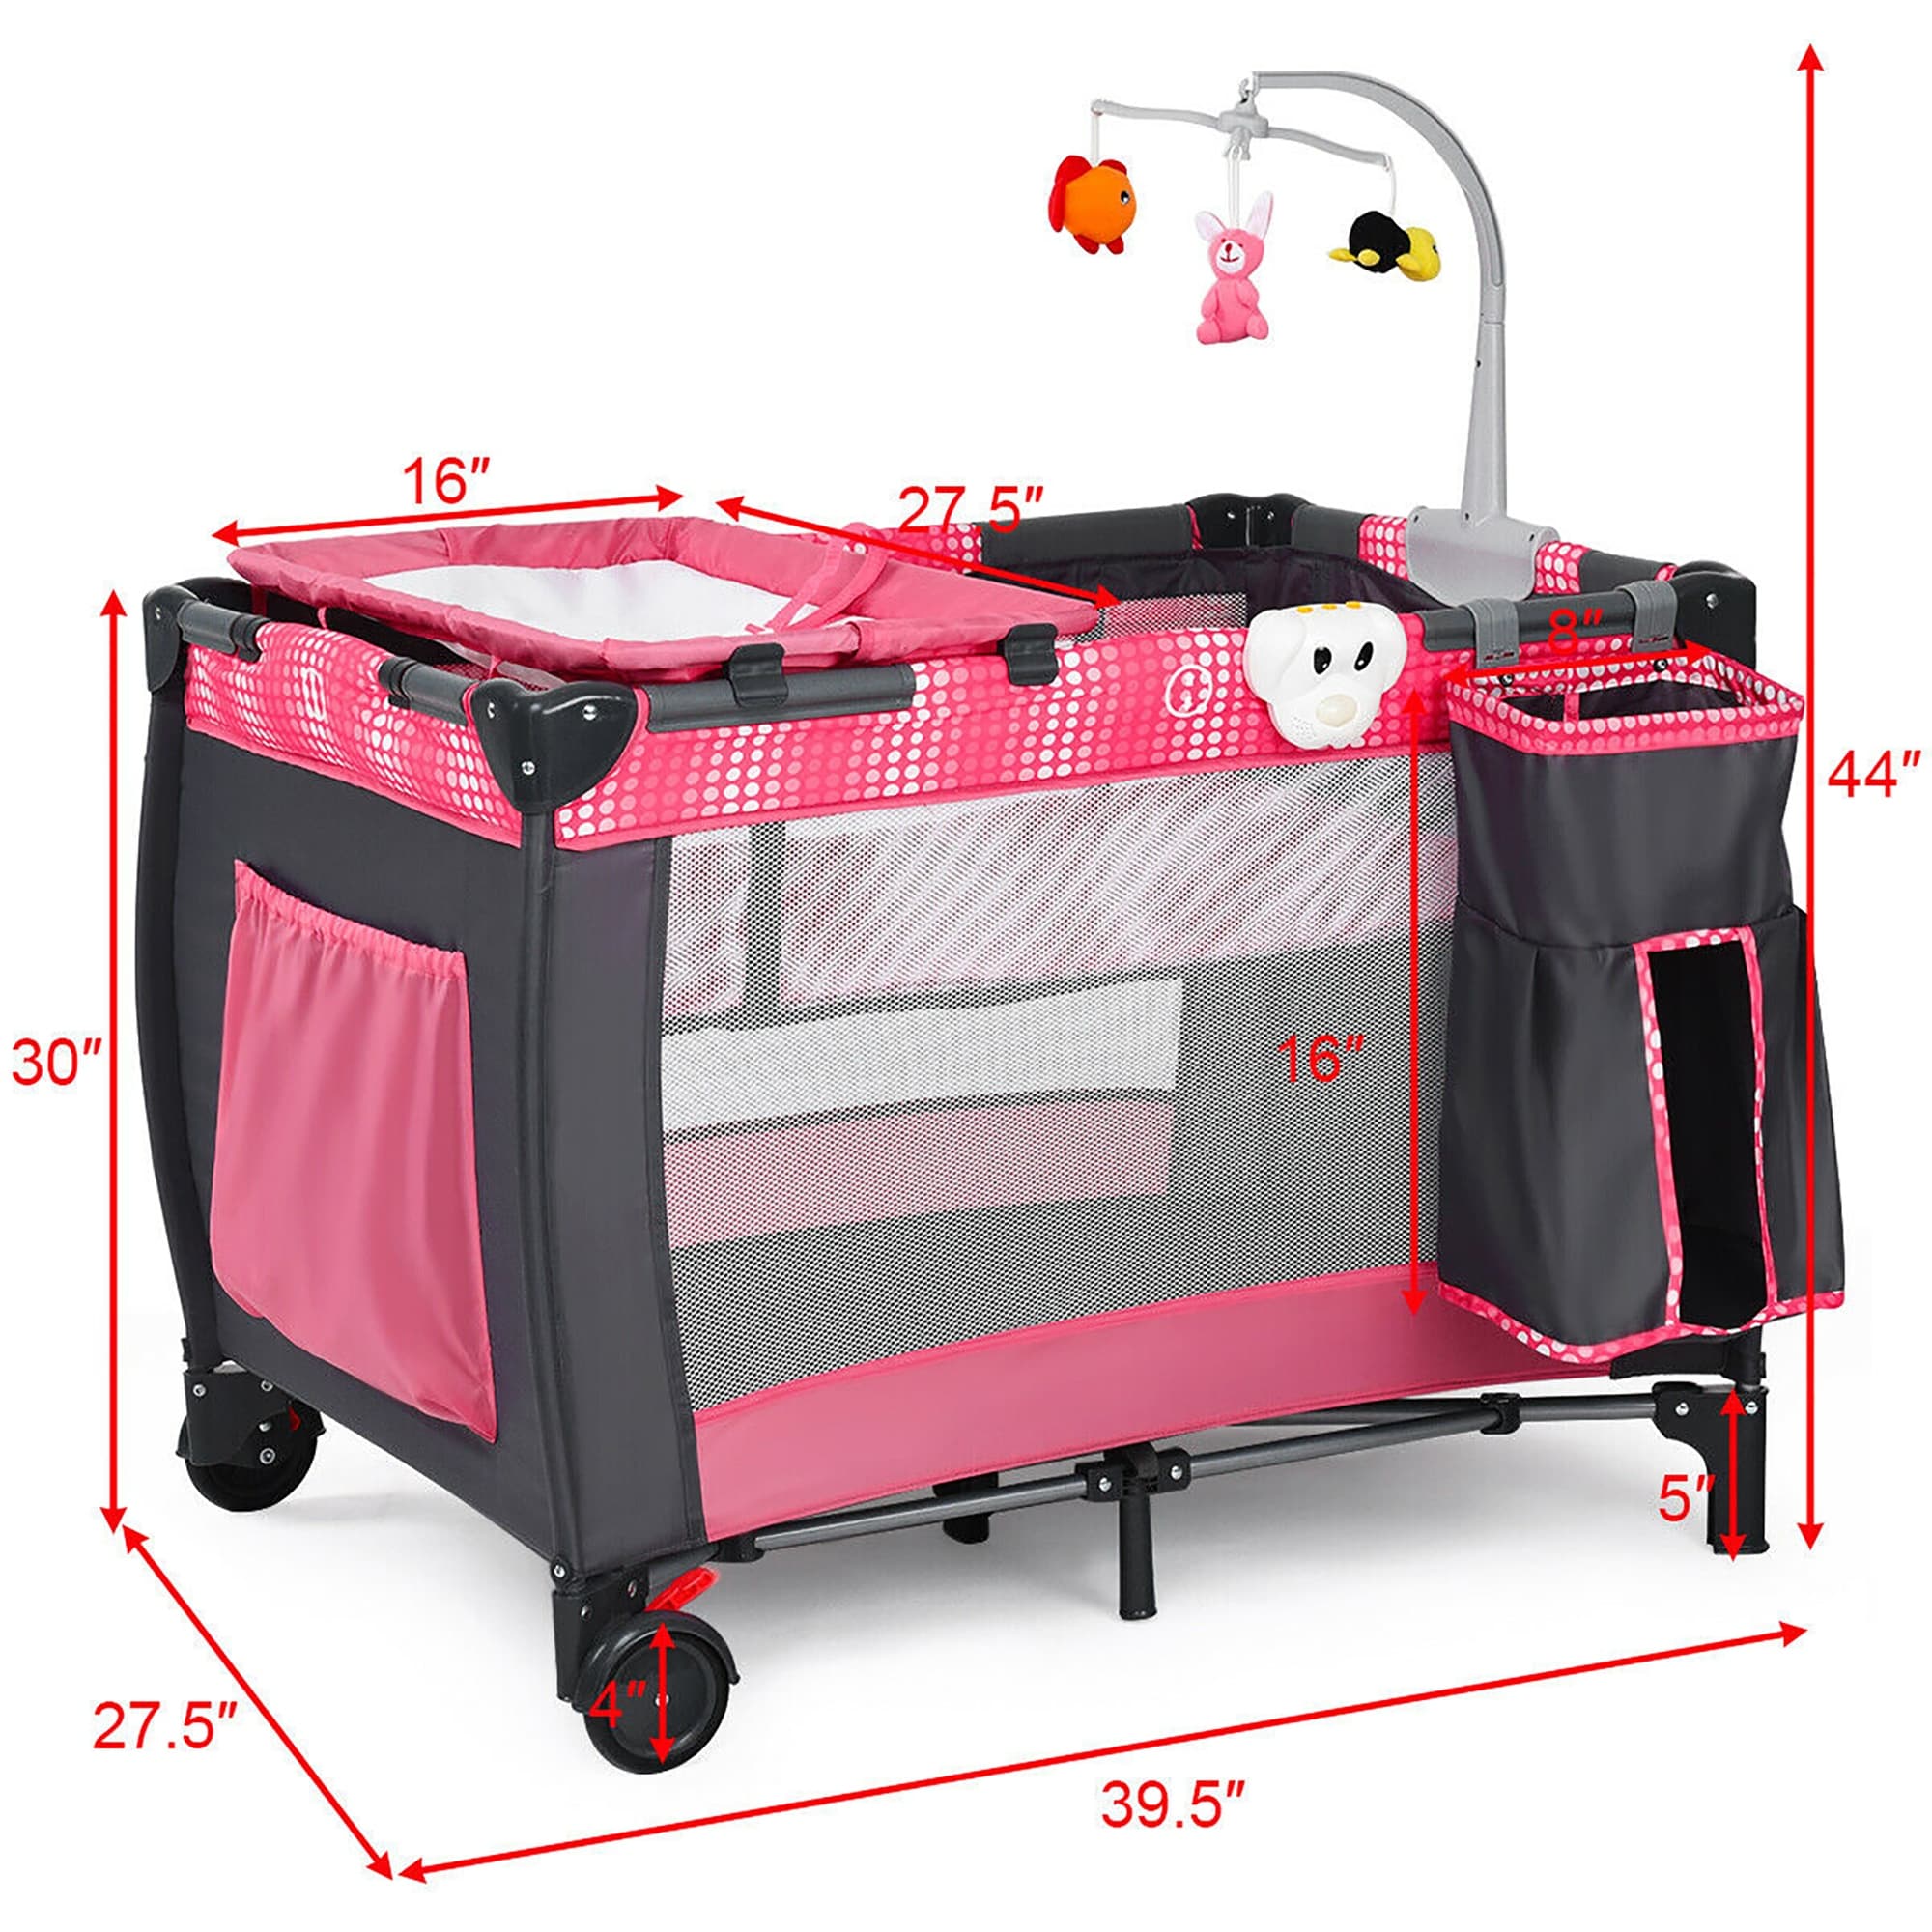 fabric playpen for babies